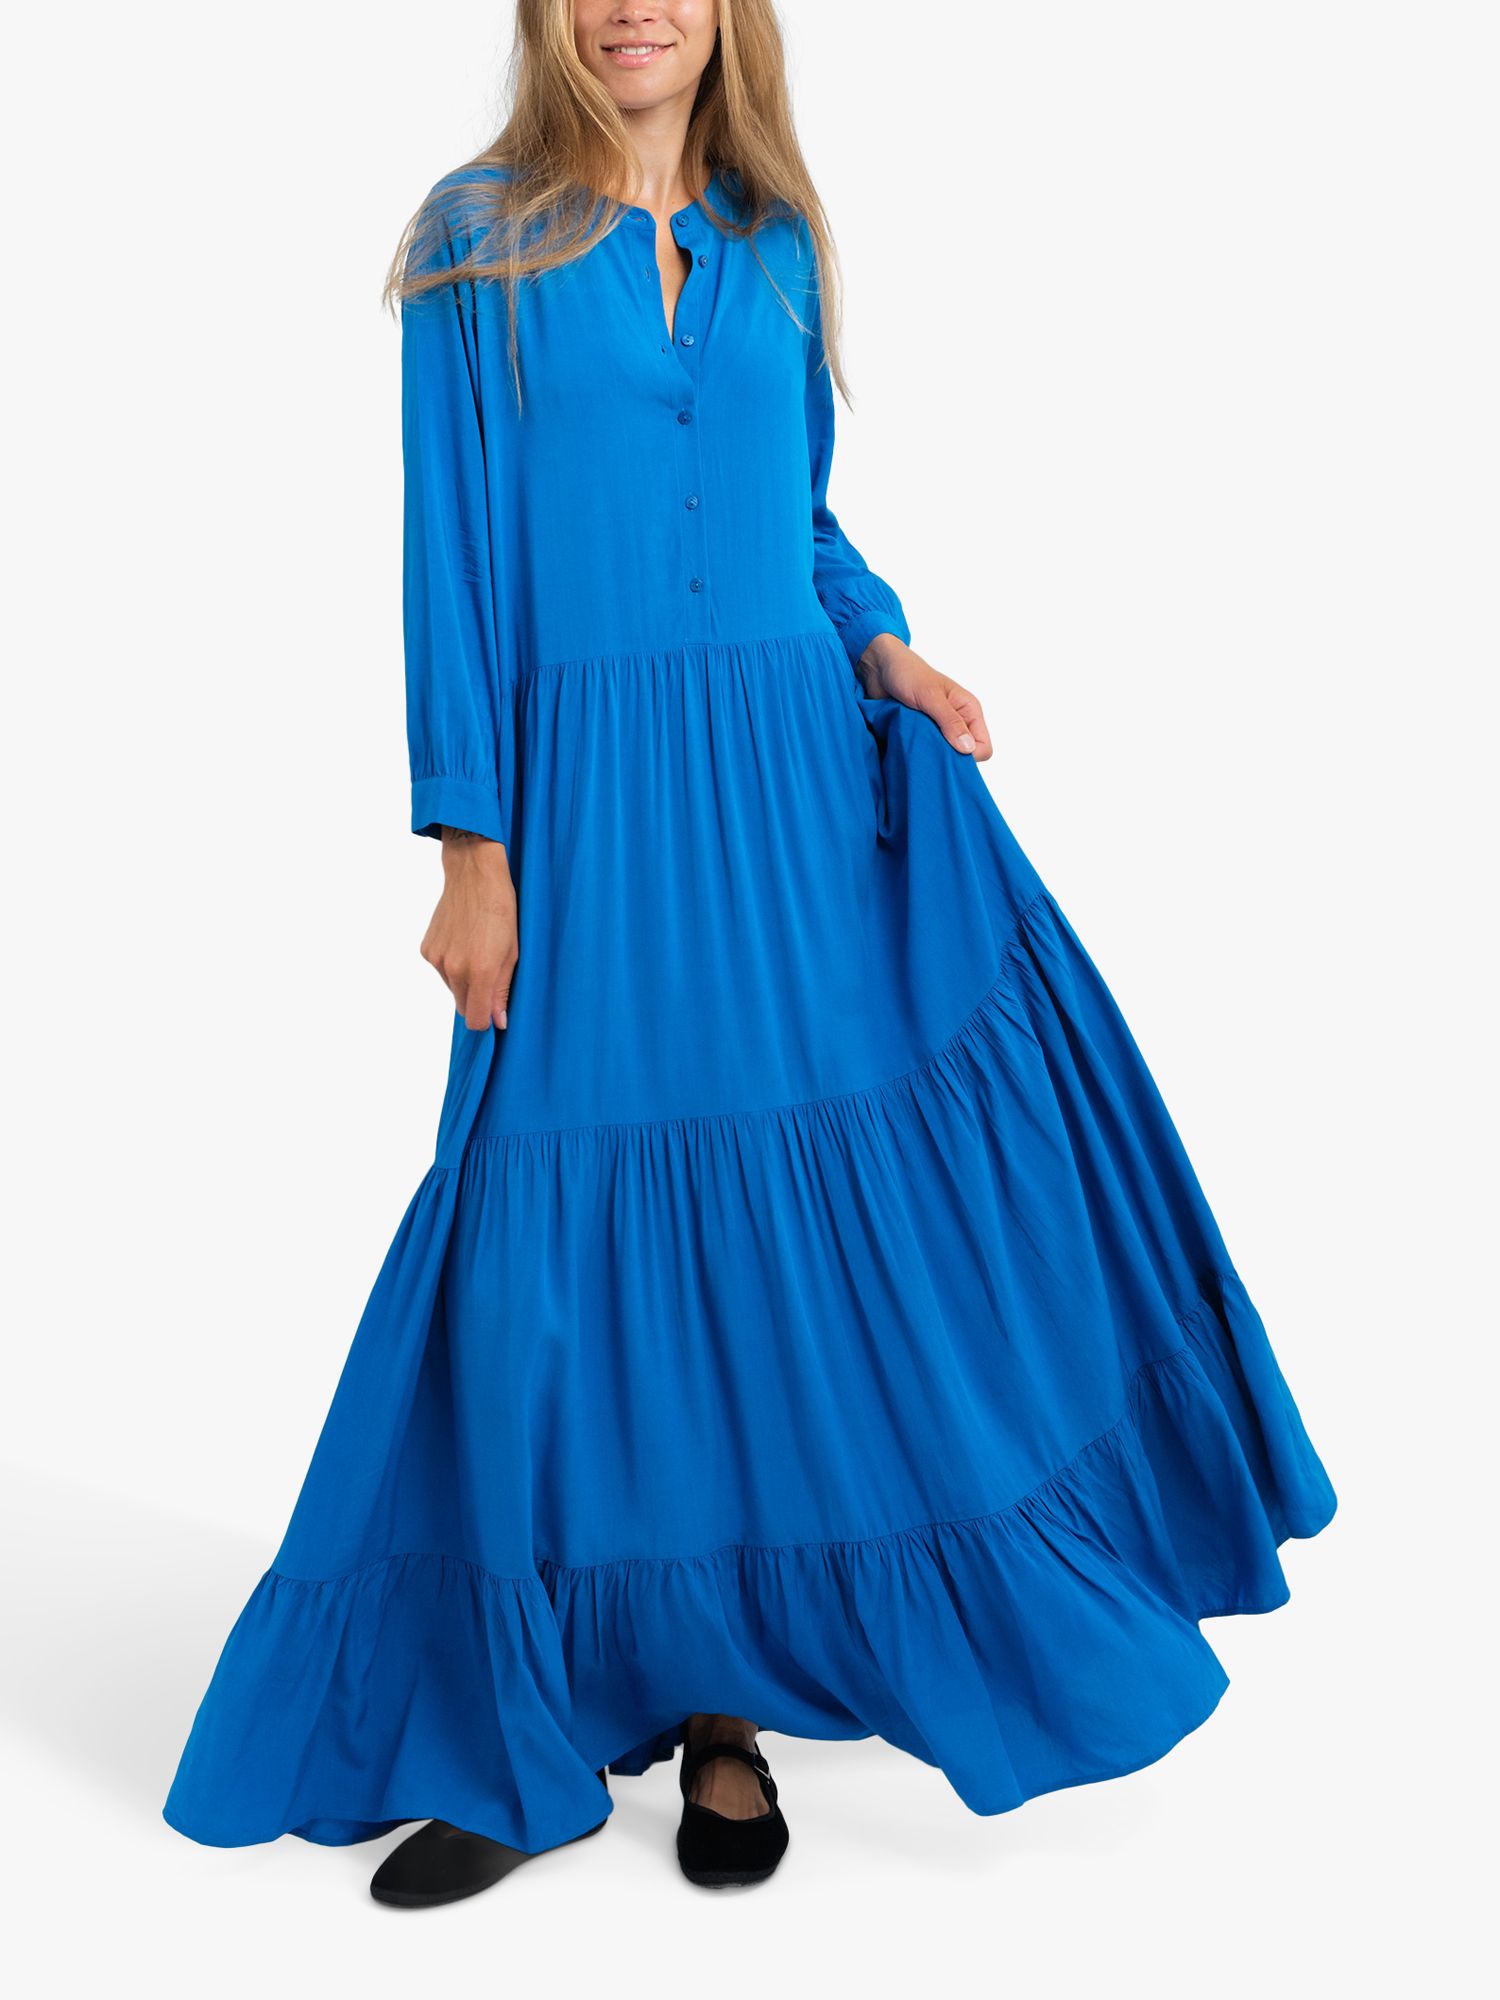 Lollys Laundry Nee Tiered Maxi Dress, Cobalt, S